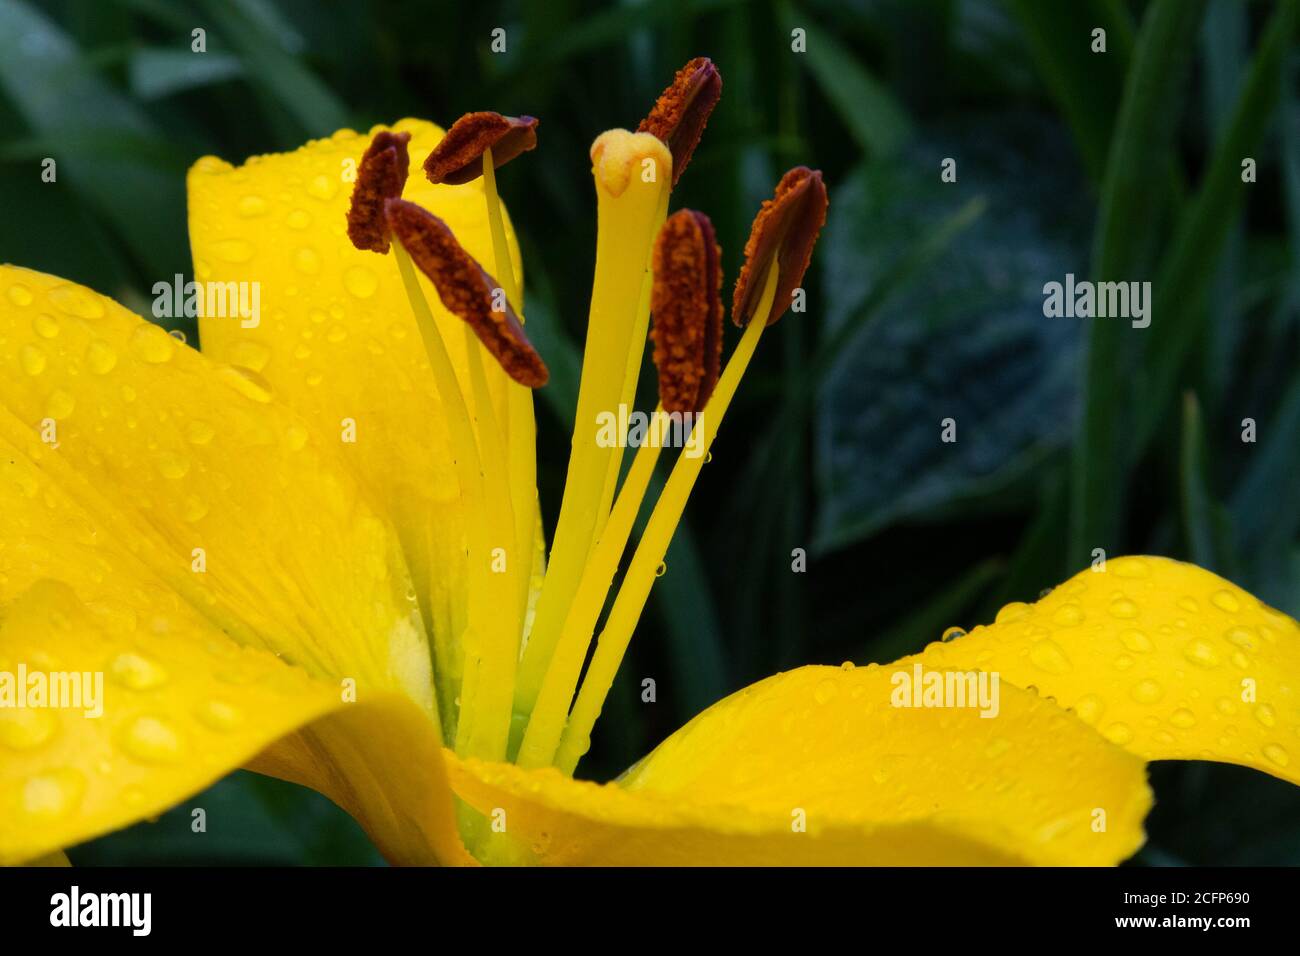 Gorgeous lush flower of yellow lilly with rain drops close up against wet foliage Stock Photo